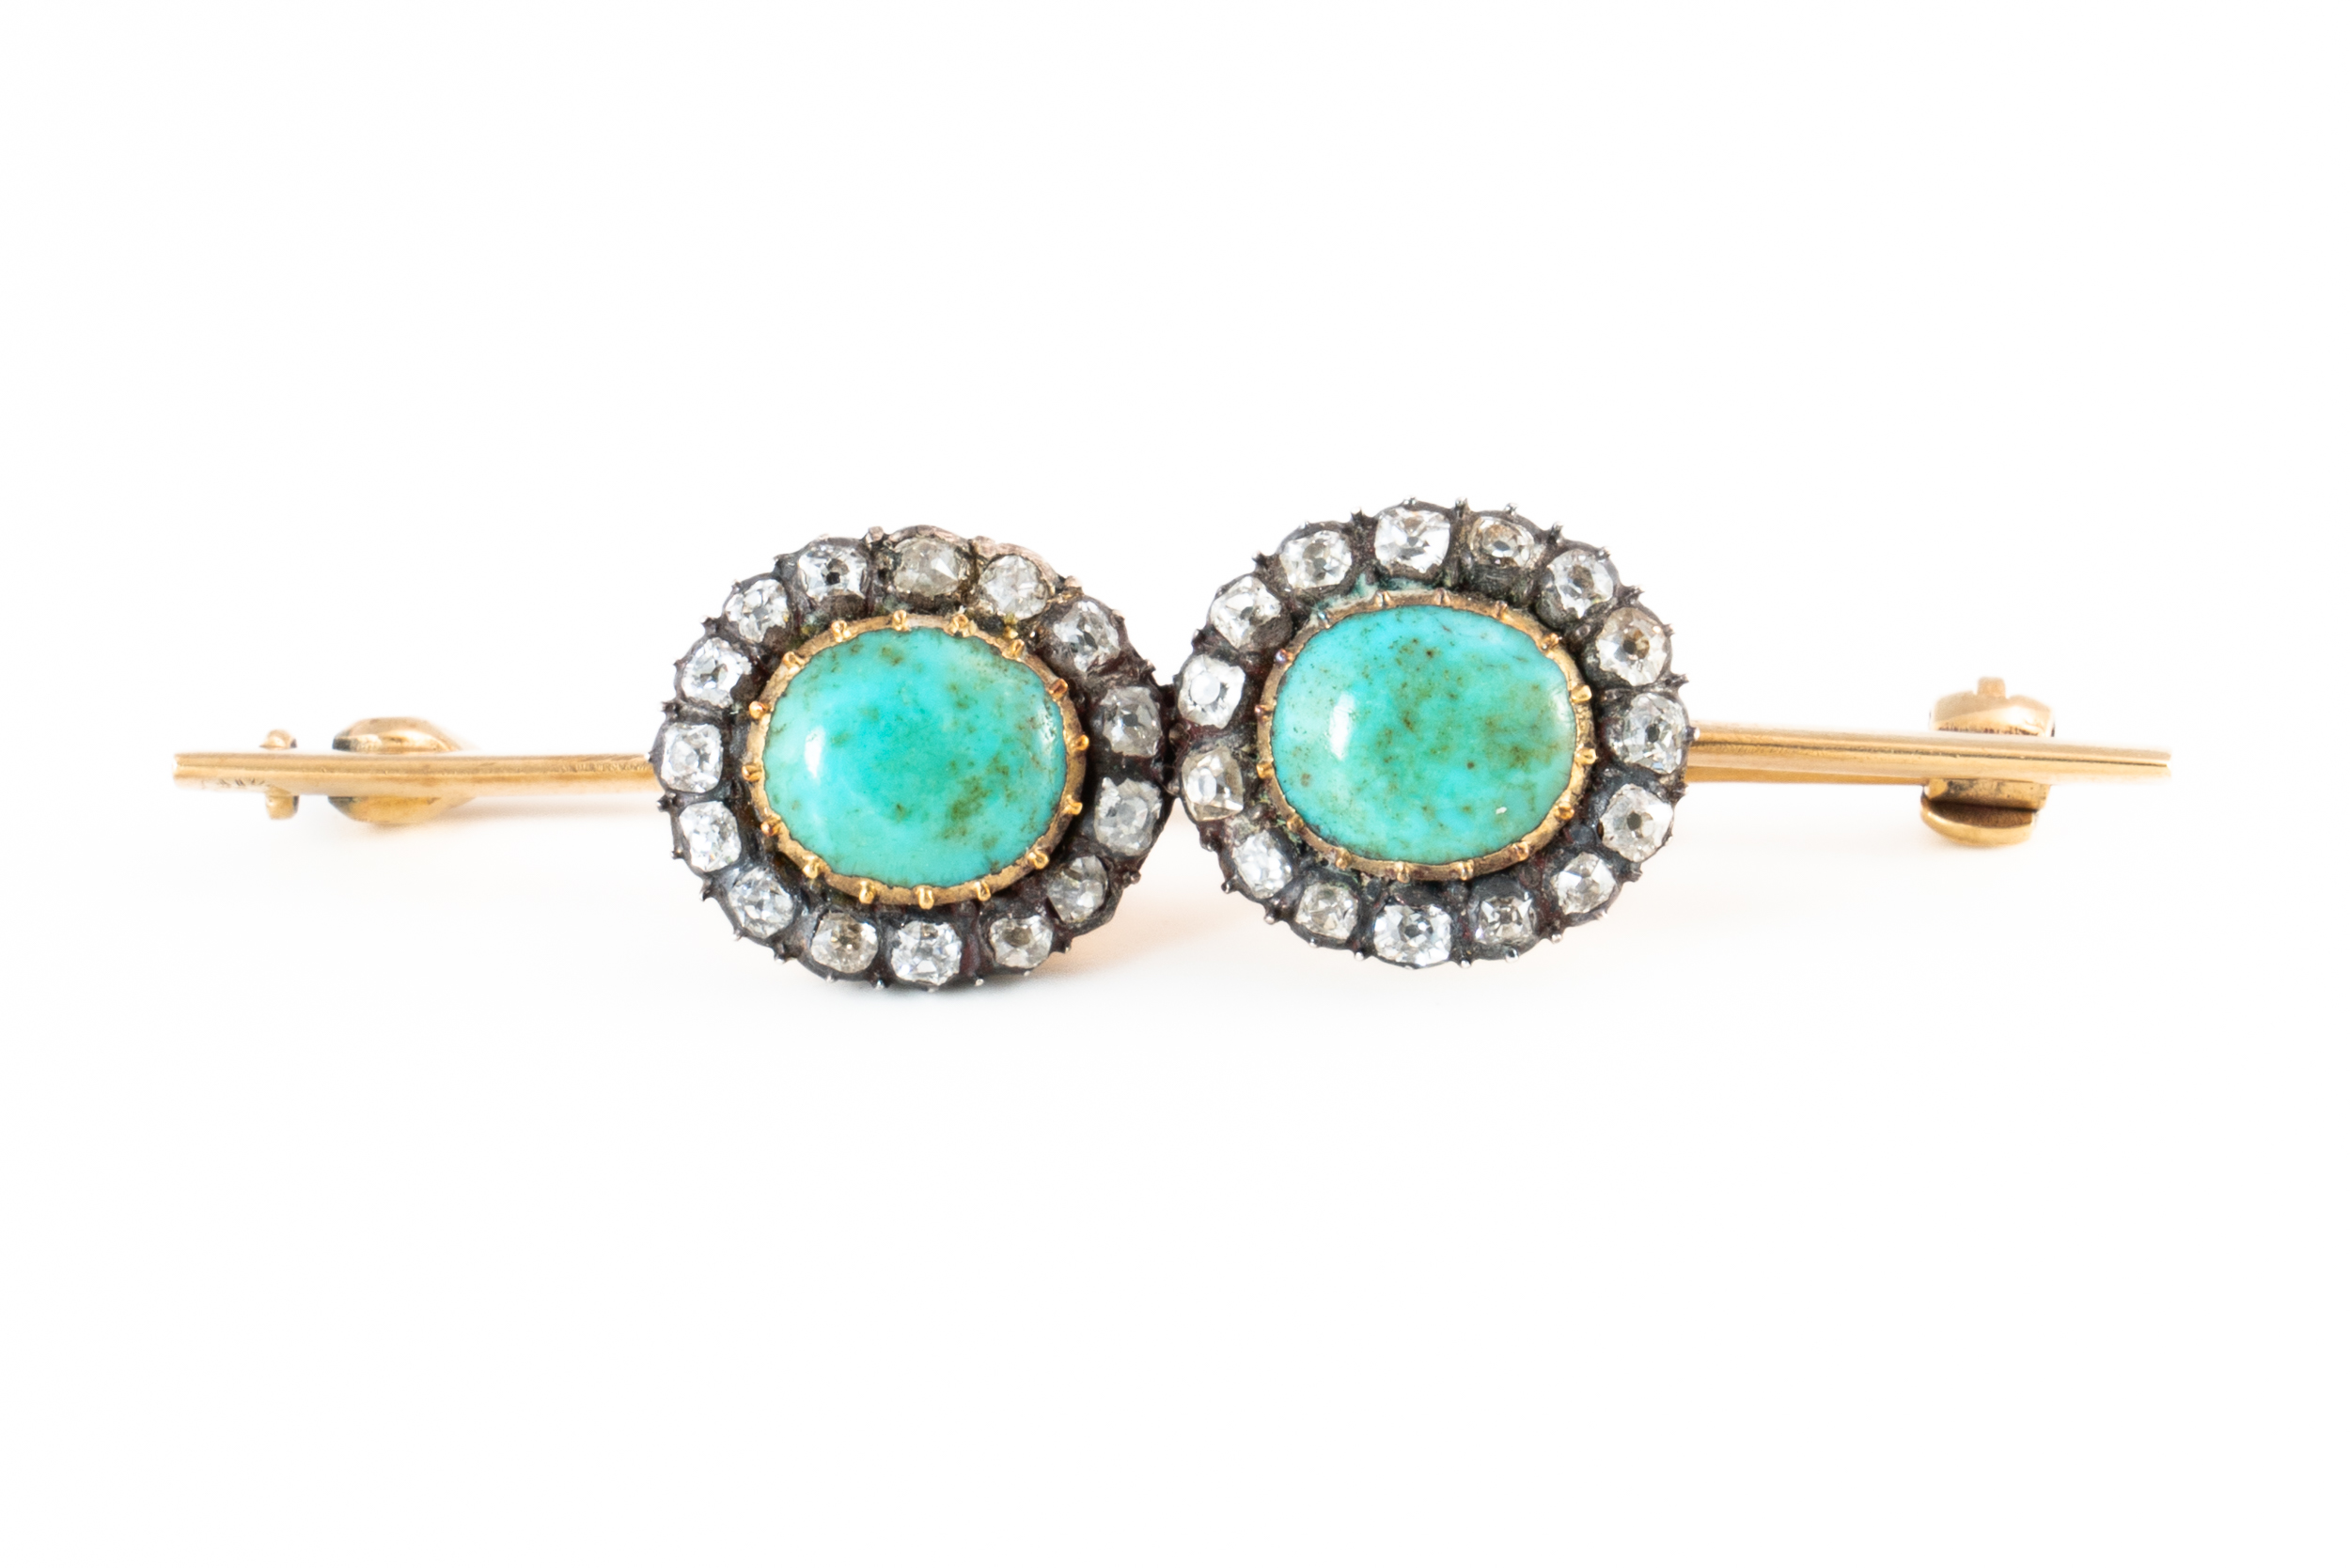 A GOLD, DIAMOND AND TURQUOISE BAR BROOCH